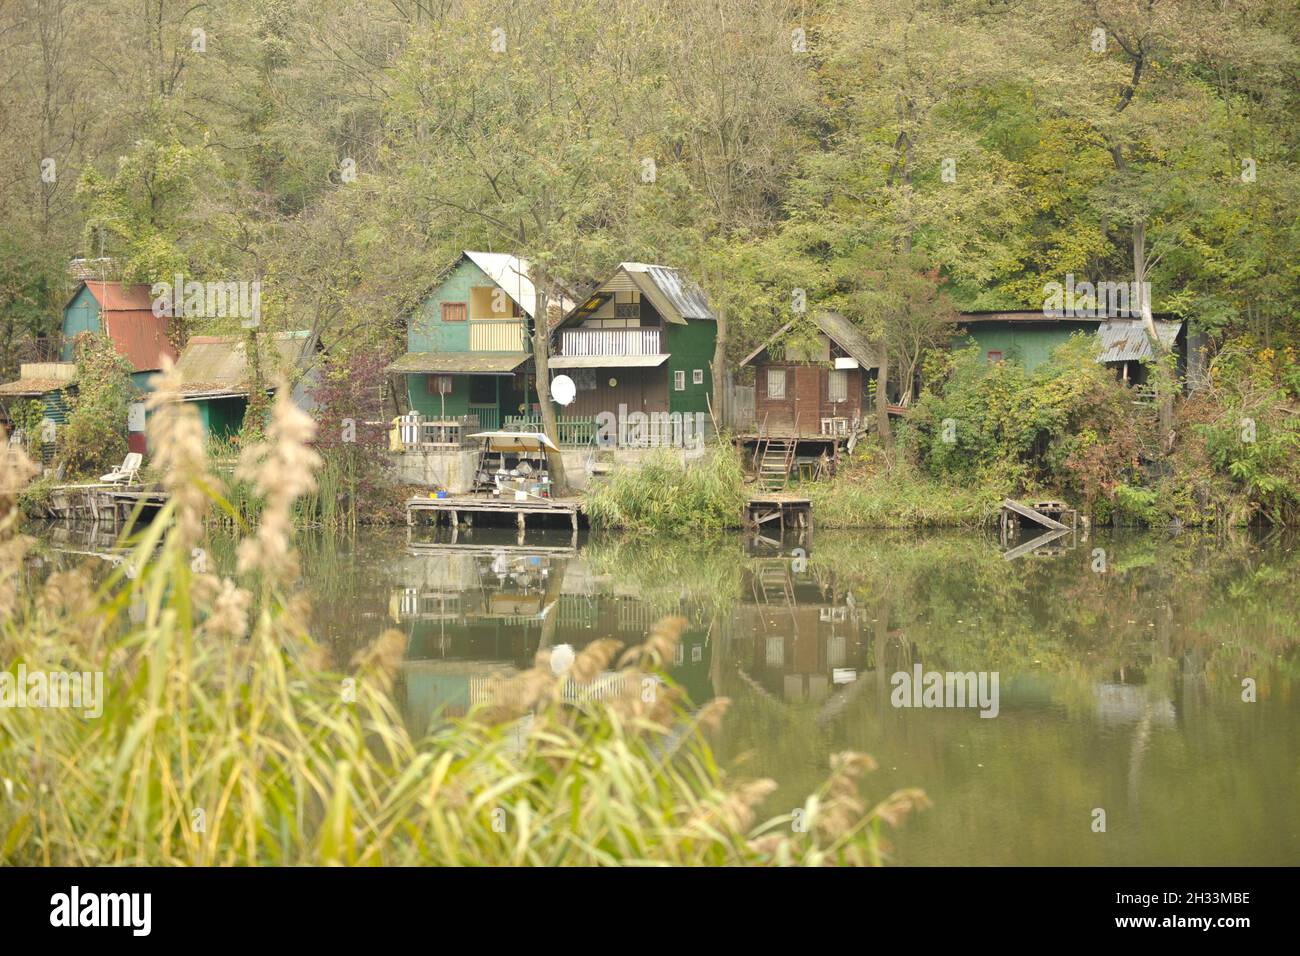 typical weekend chalet cottages in hungary Stock Photo